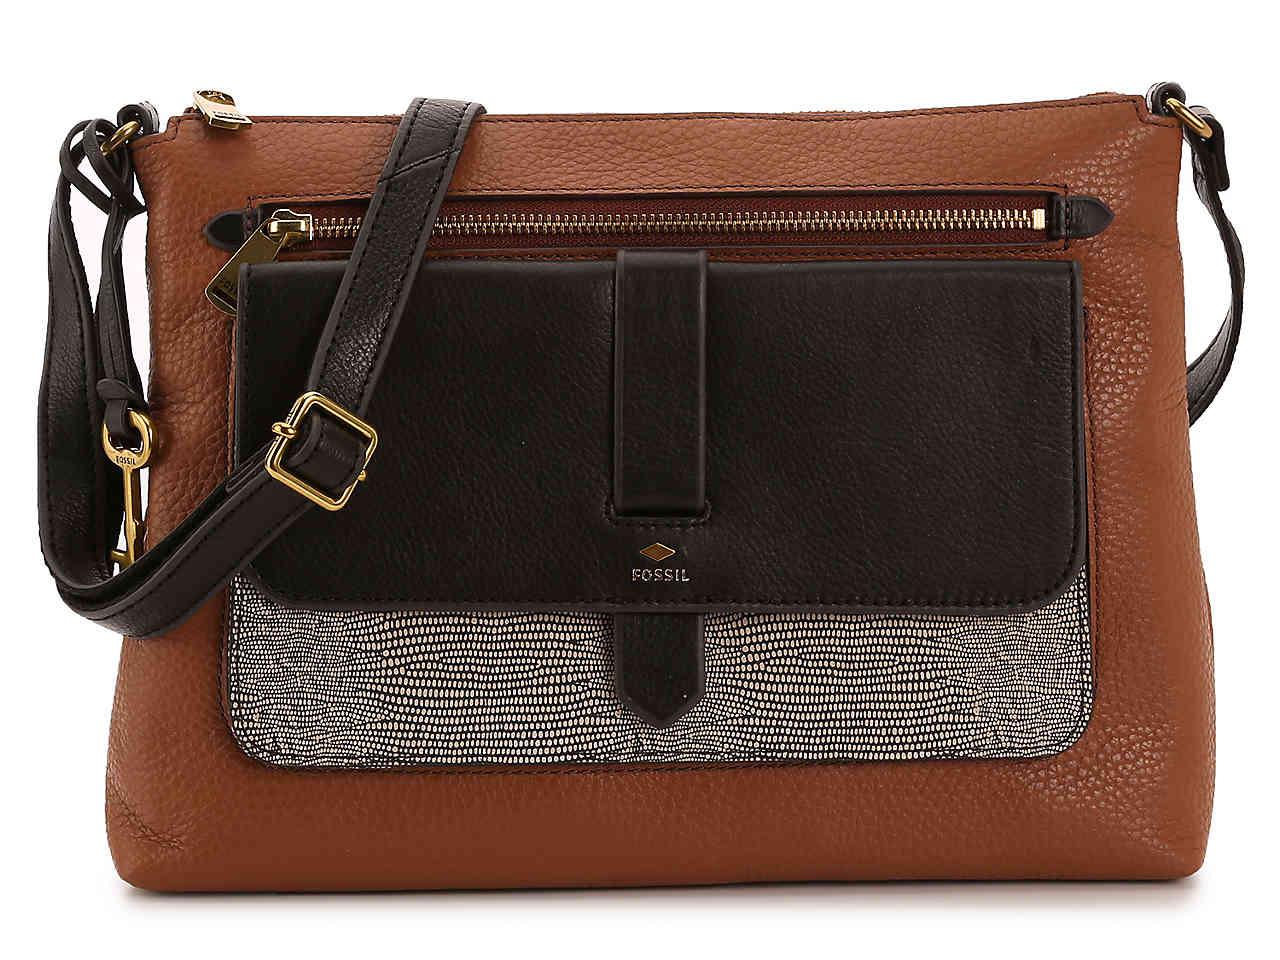 Fossil Kinley Leather Crossbody Bag in Black/White/Light Brown (Brown) - Lyst